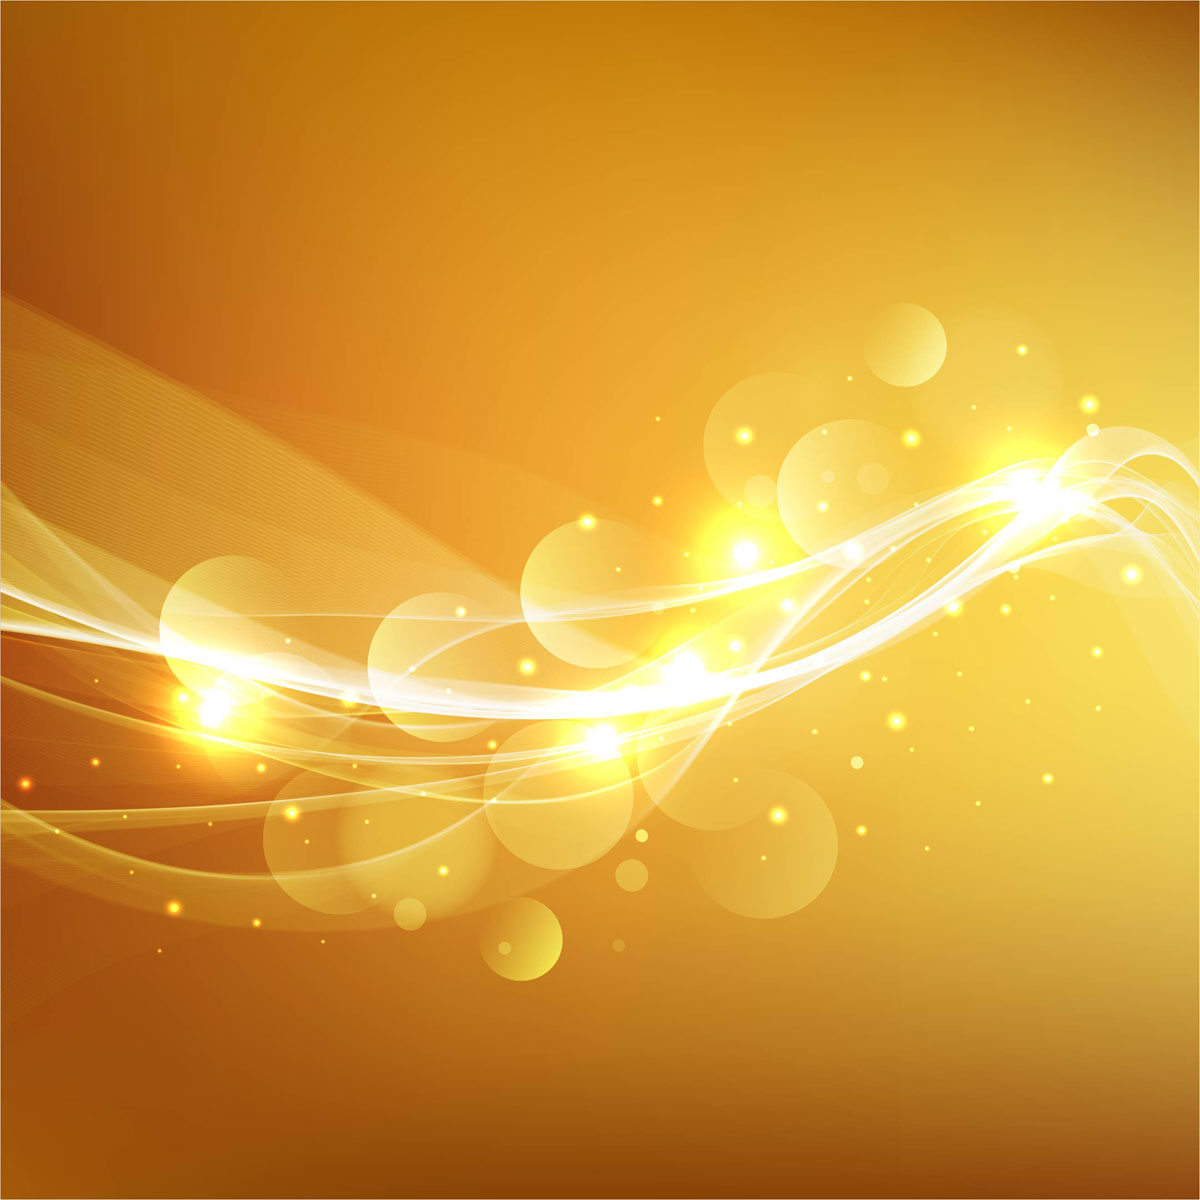 Download Abstract wavy with halation and yellow background vector ...